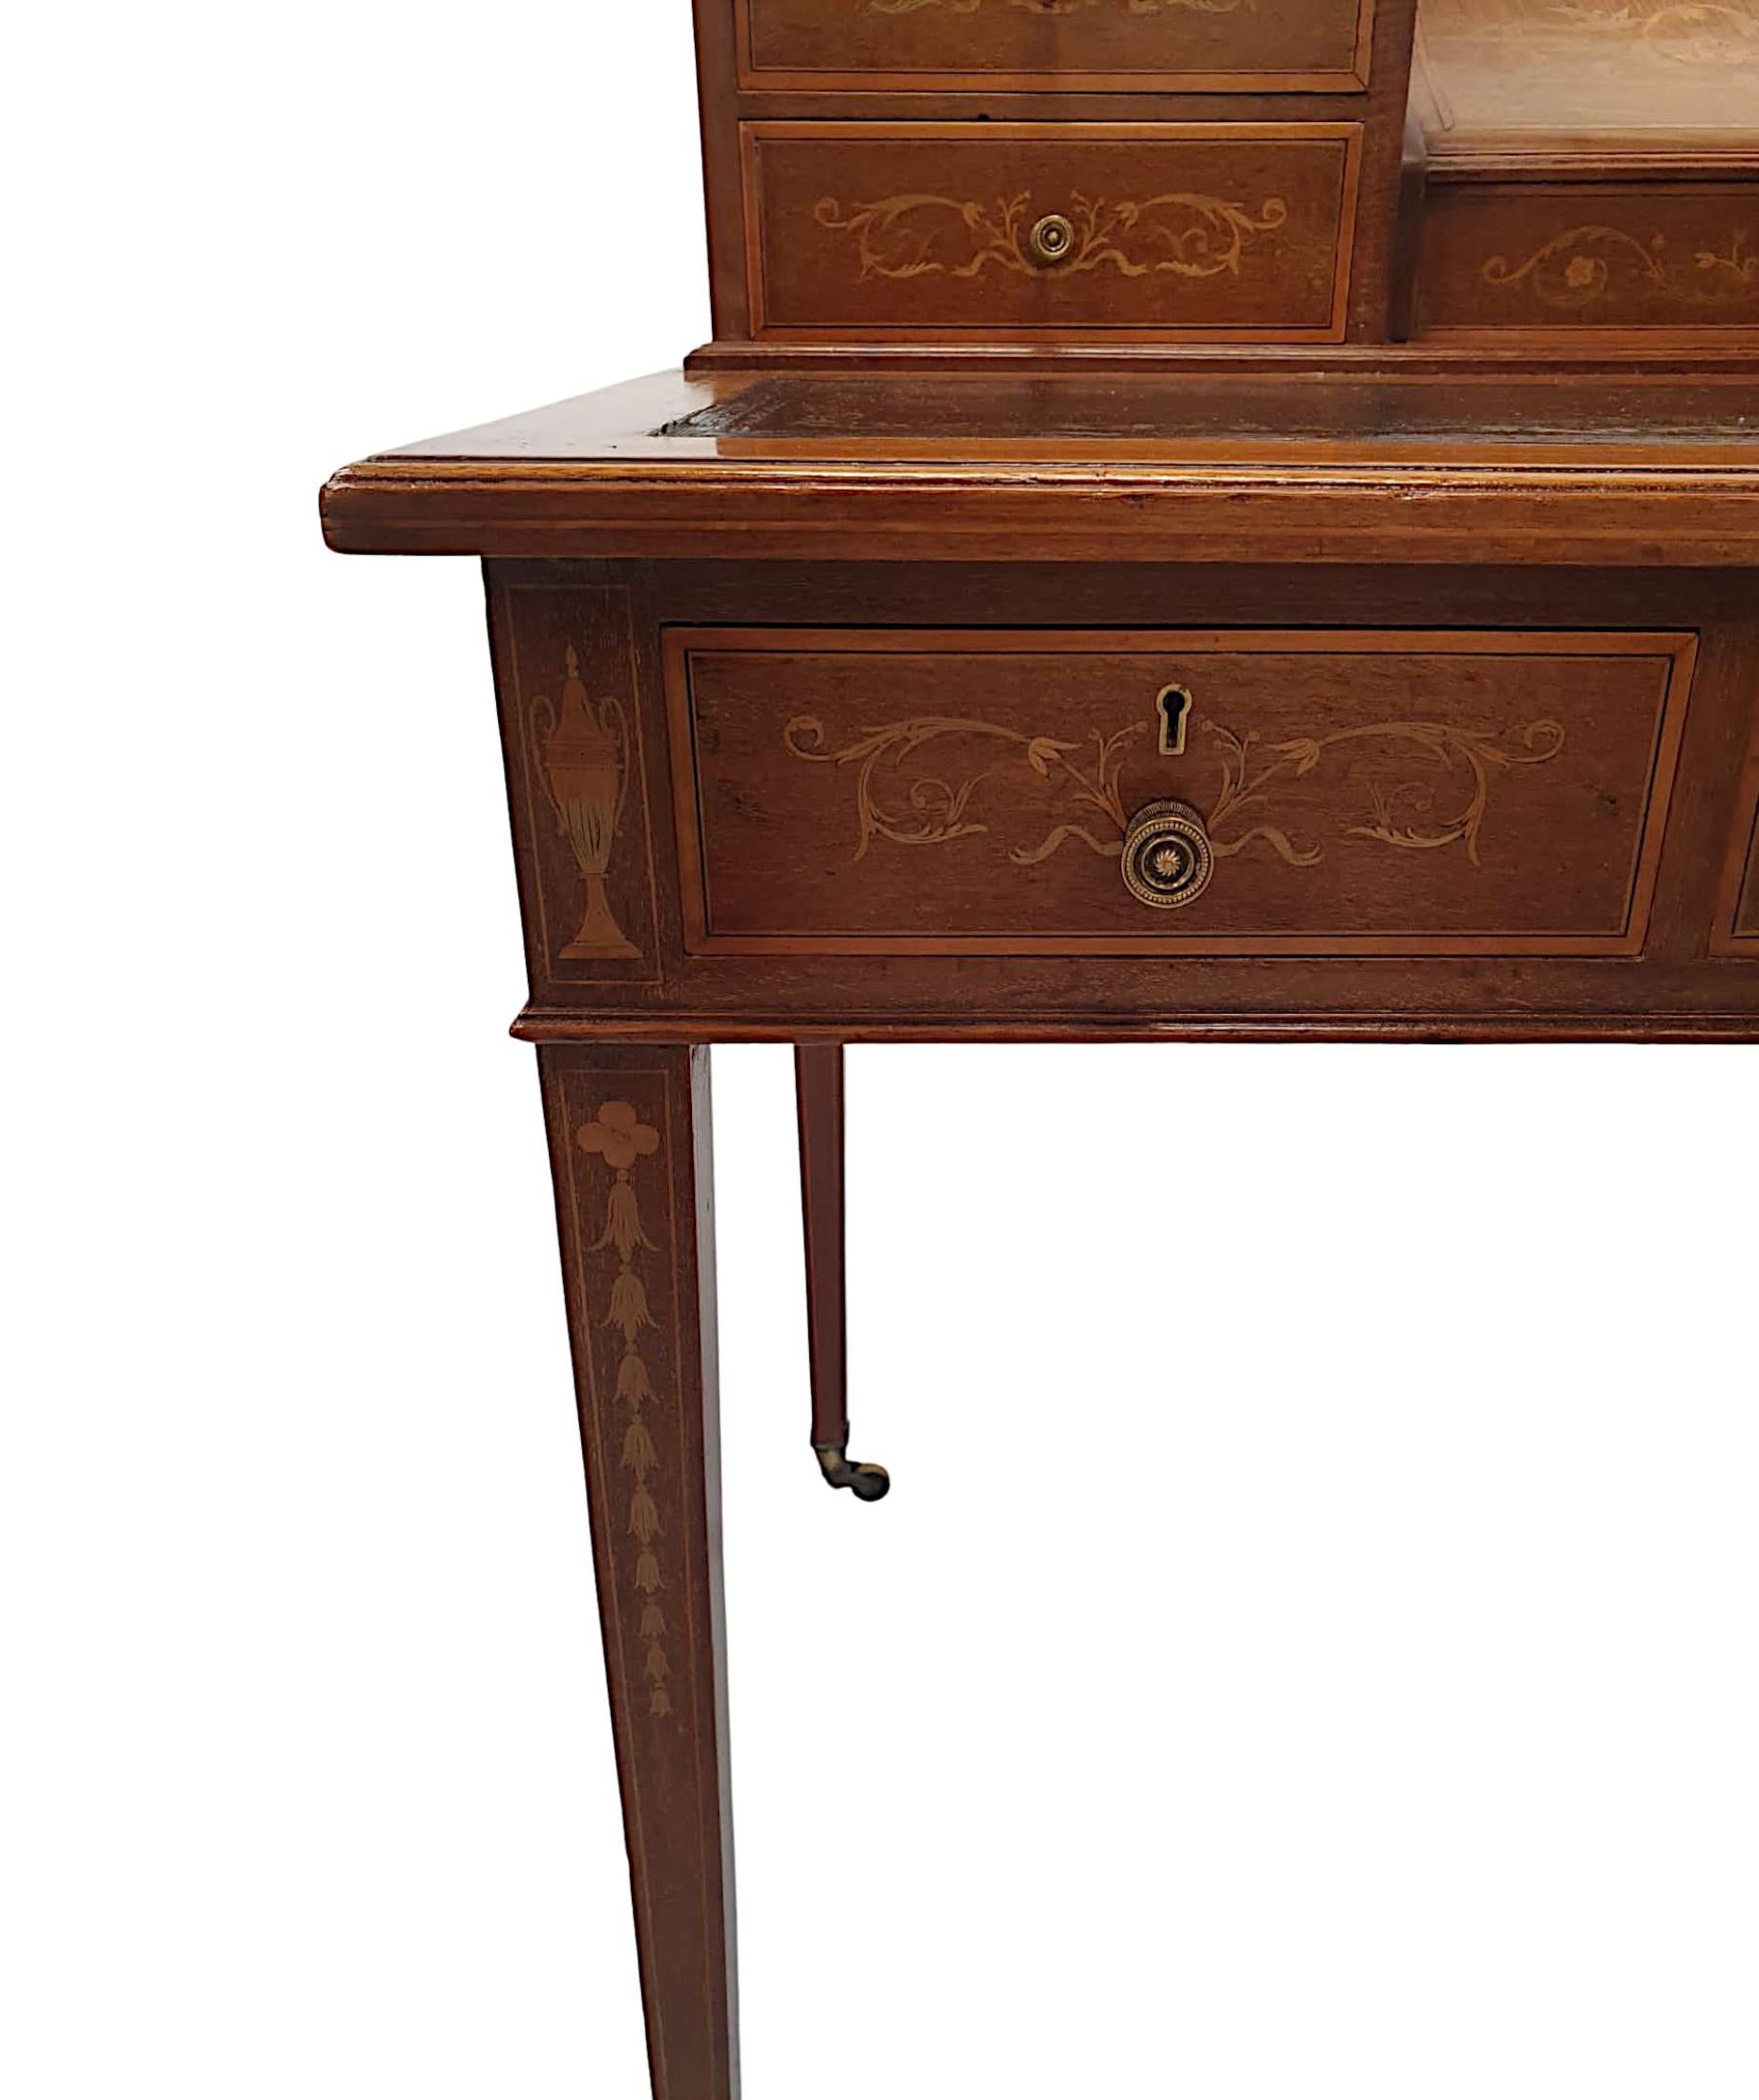 Very Fine Edwardian Desk Attributed to Edward and Roberts For Sale 1